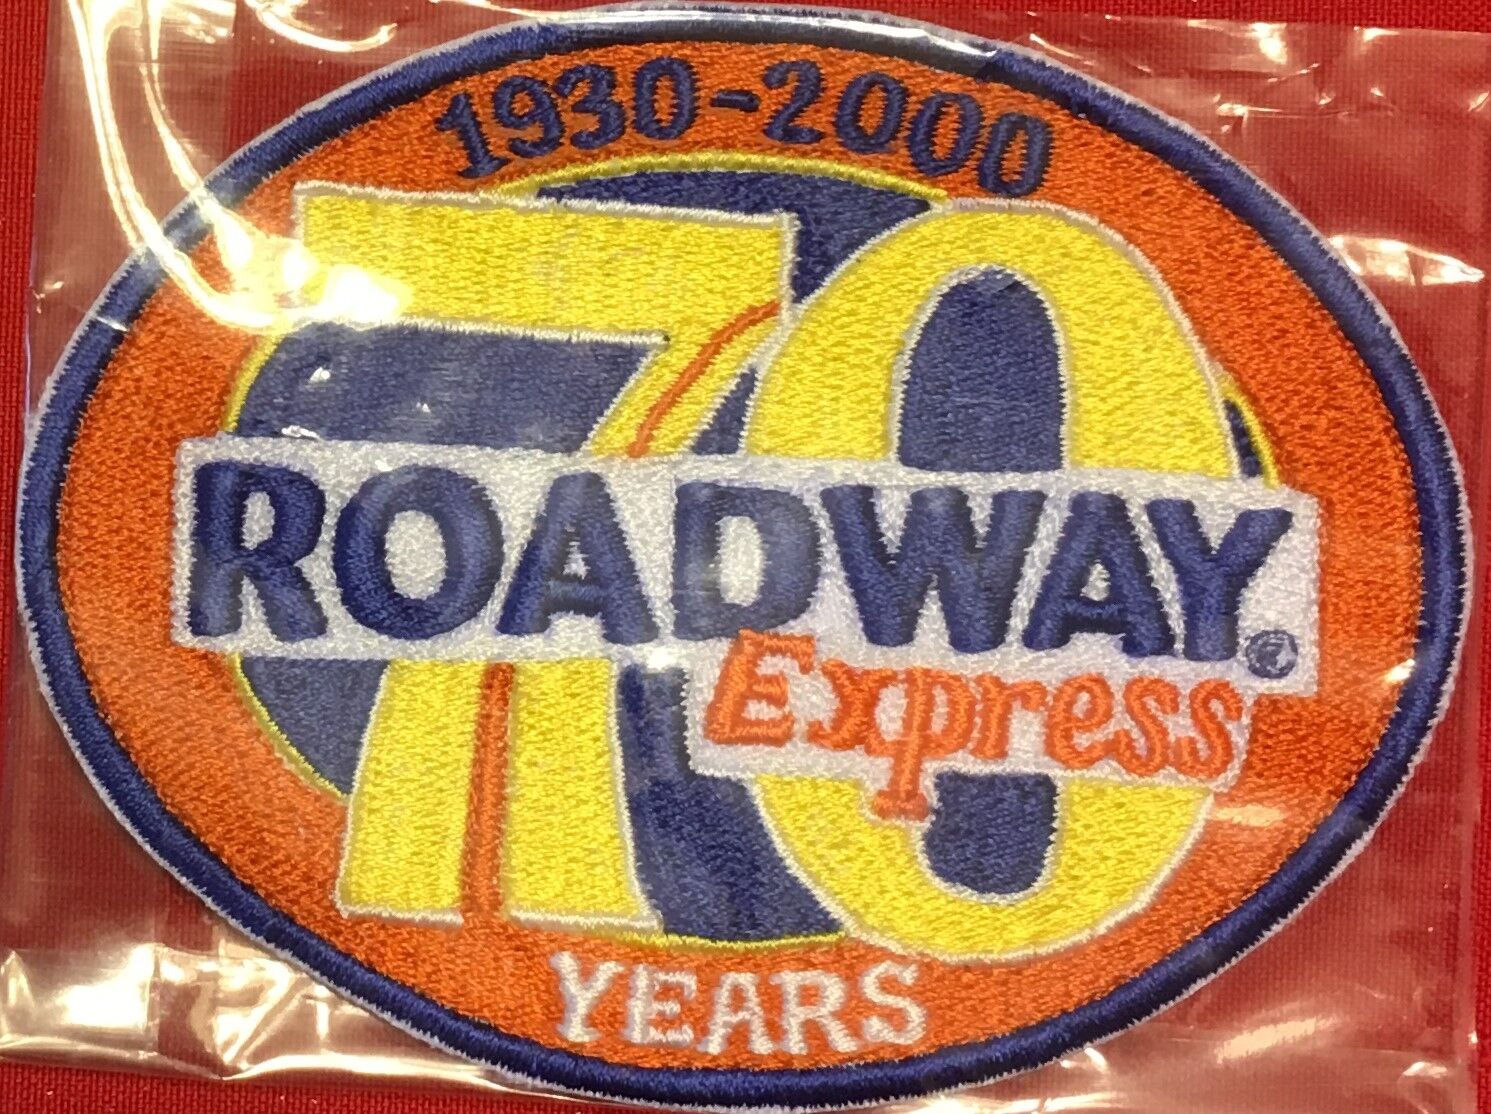 Roadway Express 1930-2000 70 years service patch now YRC 3-1/2 X 4-1/2 #3064